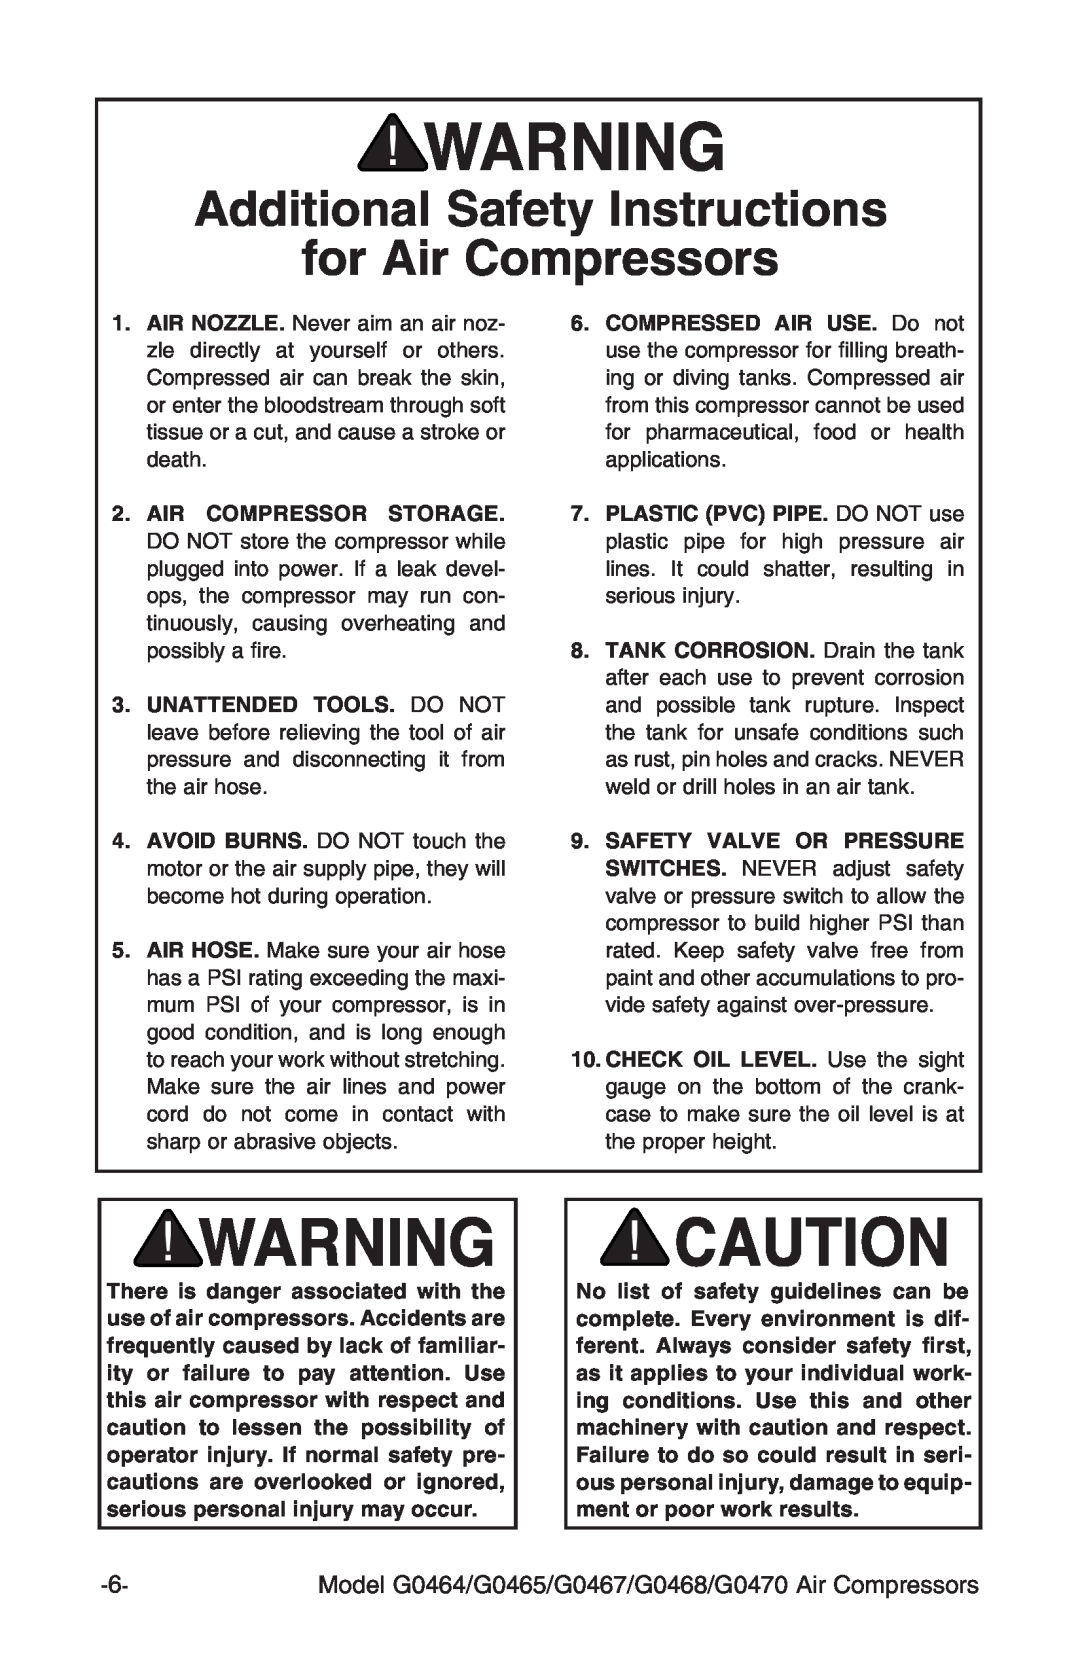 Grizzly G470, G0468, G0467, G0465 instruction manual Additional Safety Instructions for Air Compressors 